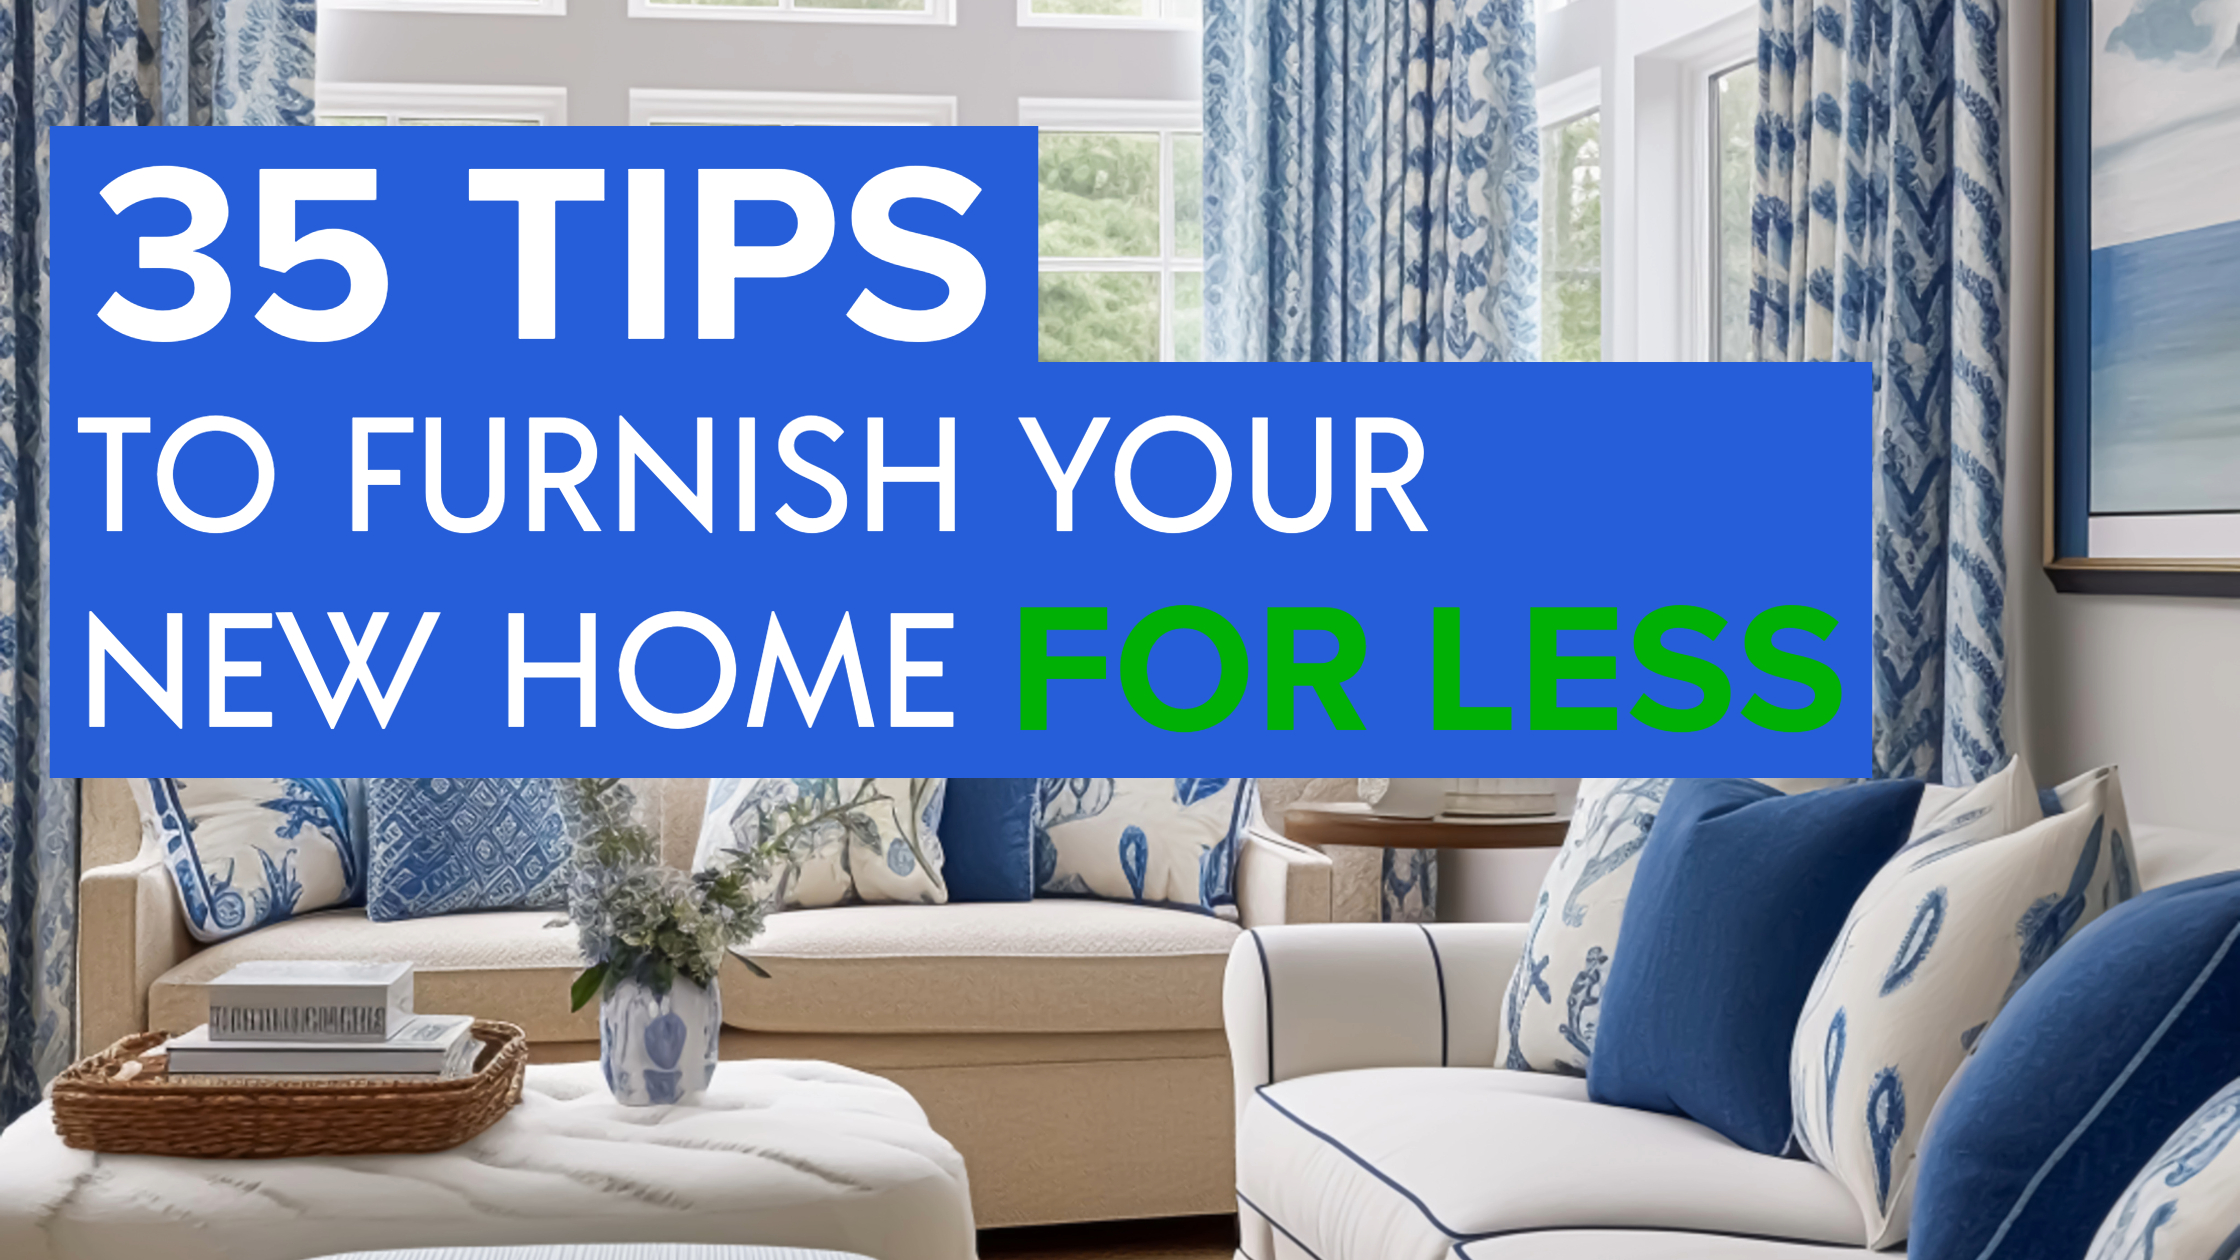 41754c35_Tips_to_Furnish_your_New_Home_-Blog-1.jpeg